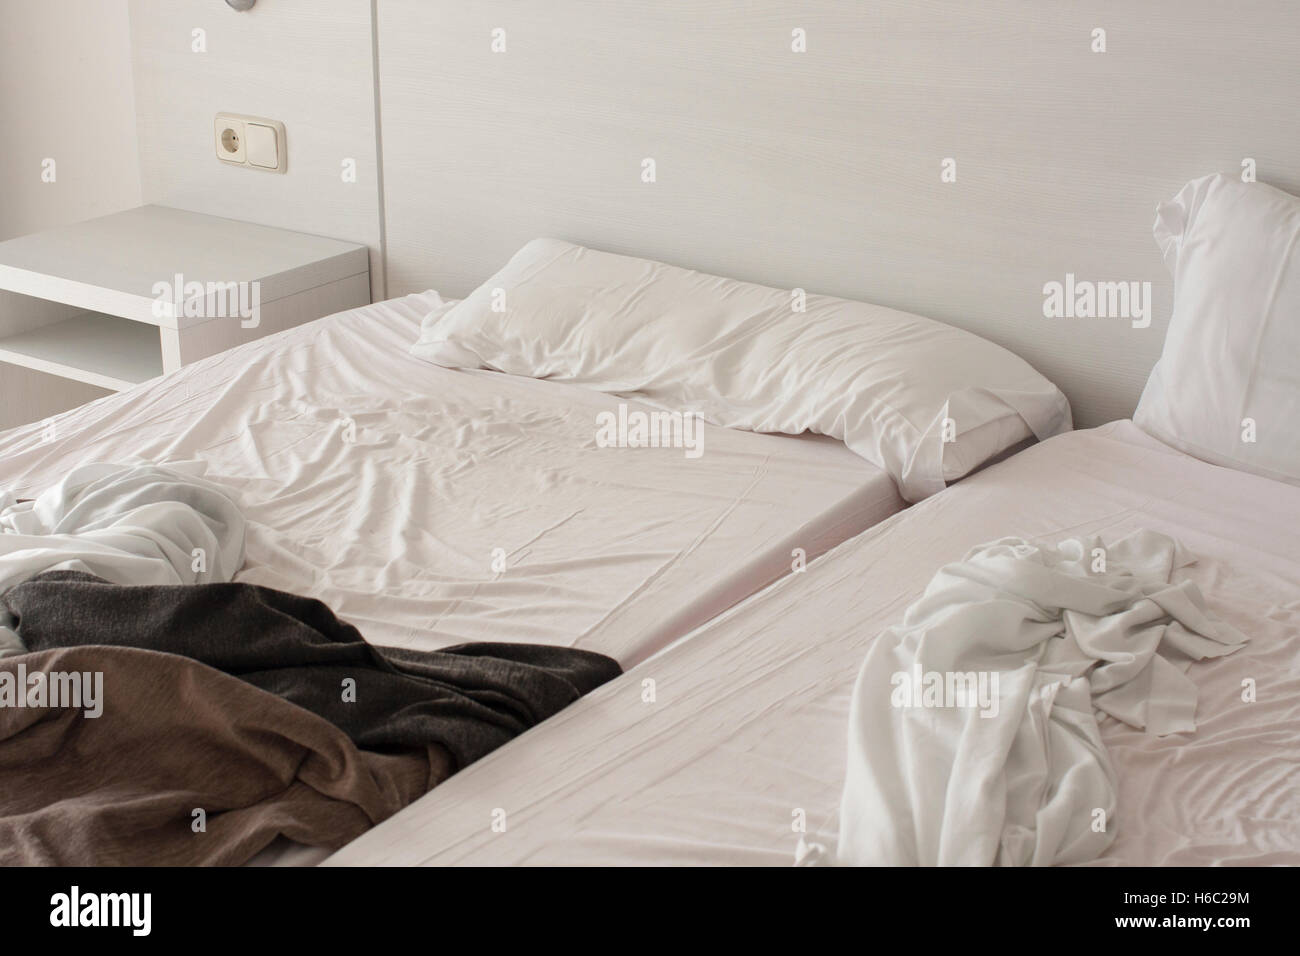 Unmade Hotel Beds Stock Photo